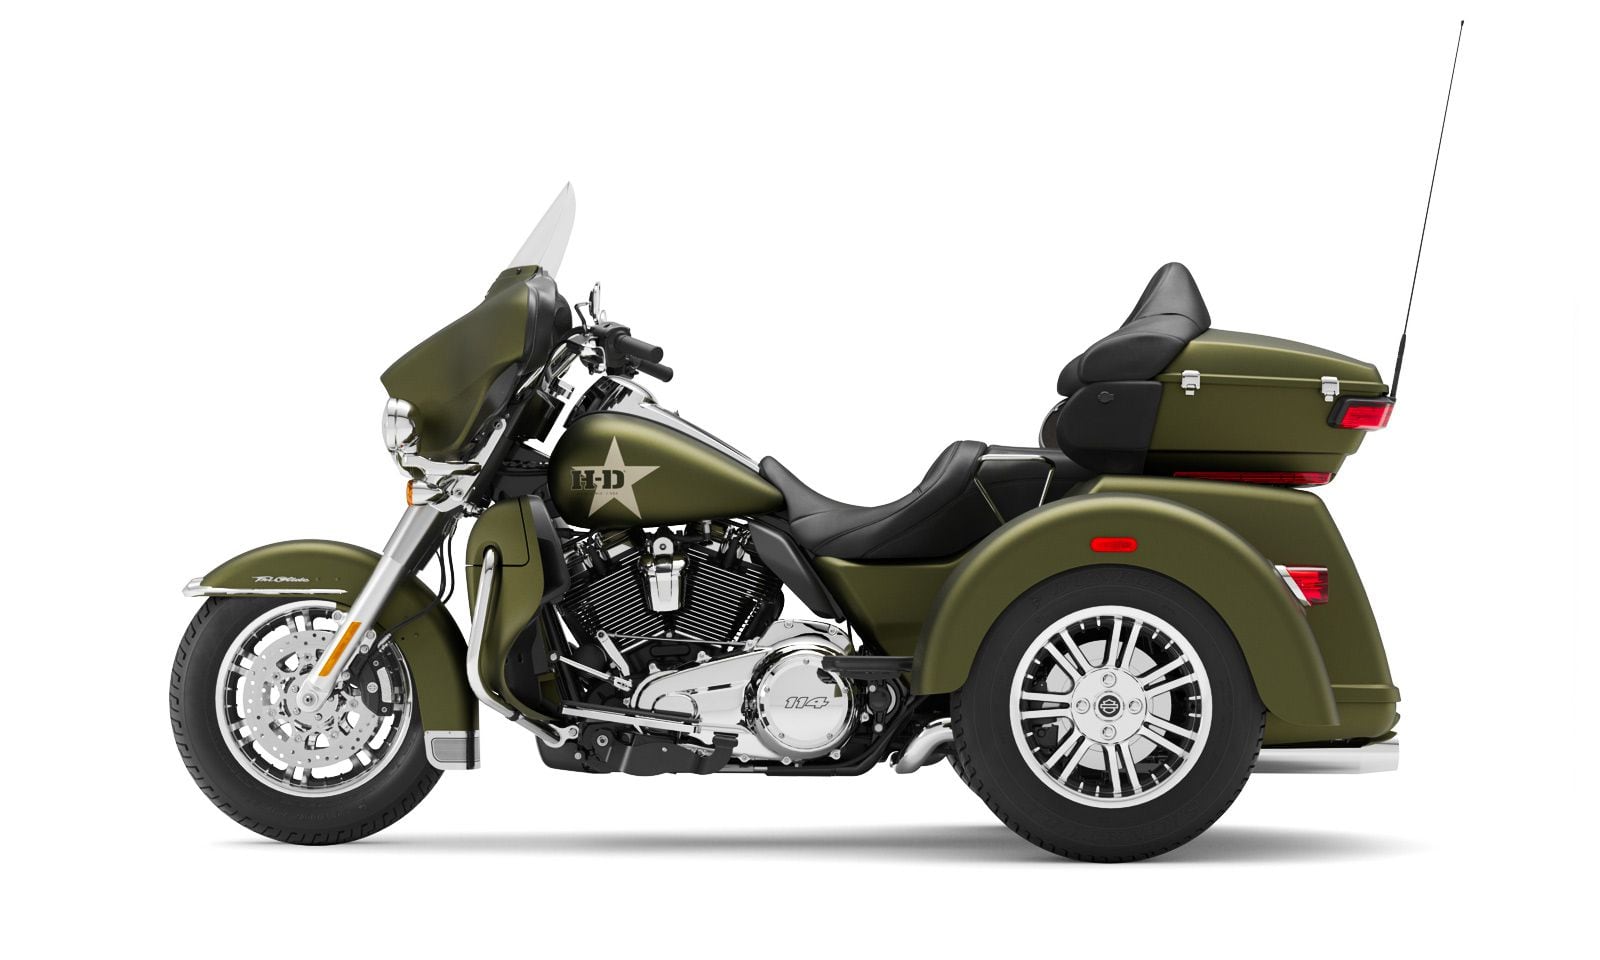 The Milwaukee-Eight-powered Tri Glide Ultra also receives the G.I. Enthusiast Collection treatment.